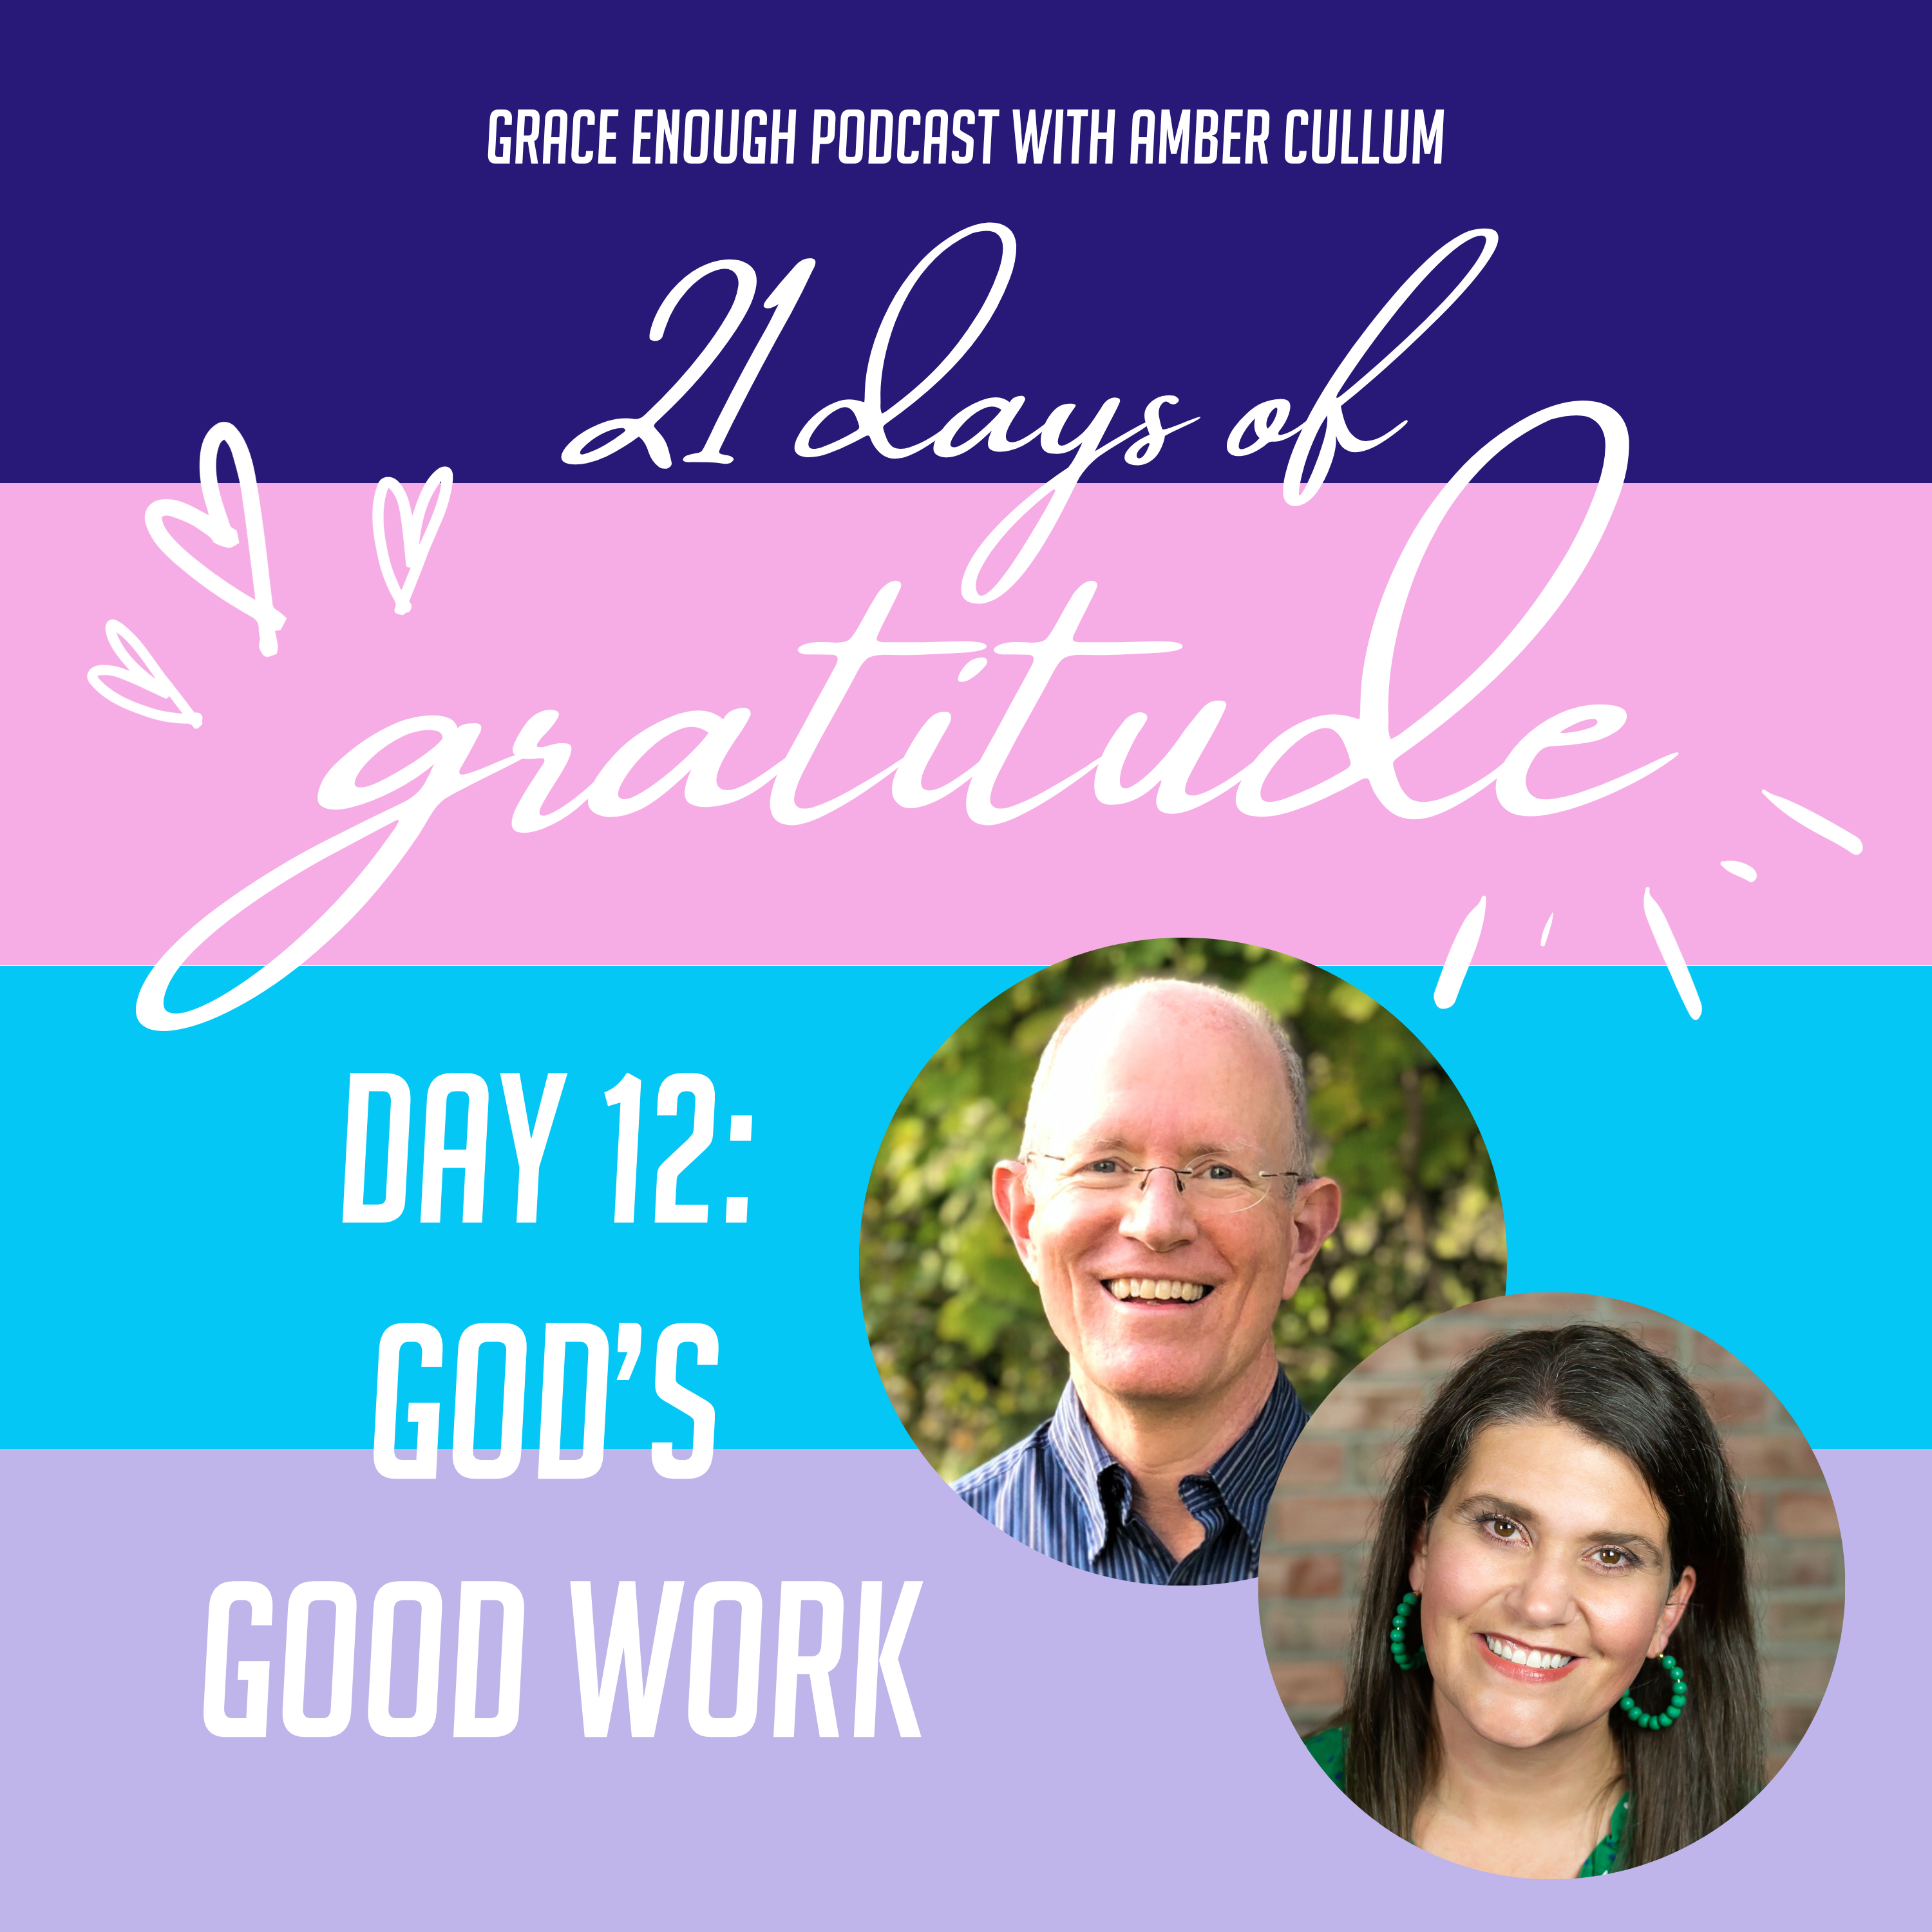 21 Days of Gratitude: Day 12, God's Good Work feat. James Early